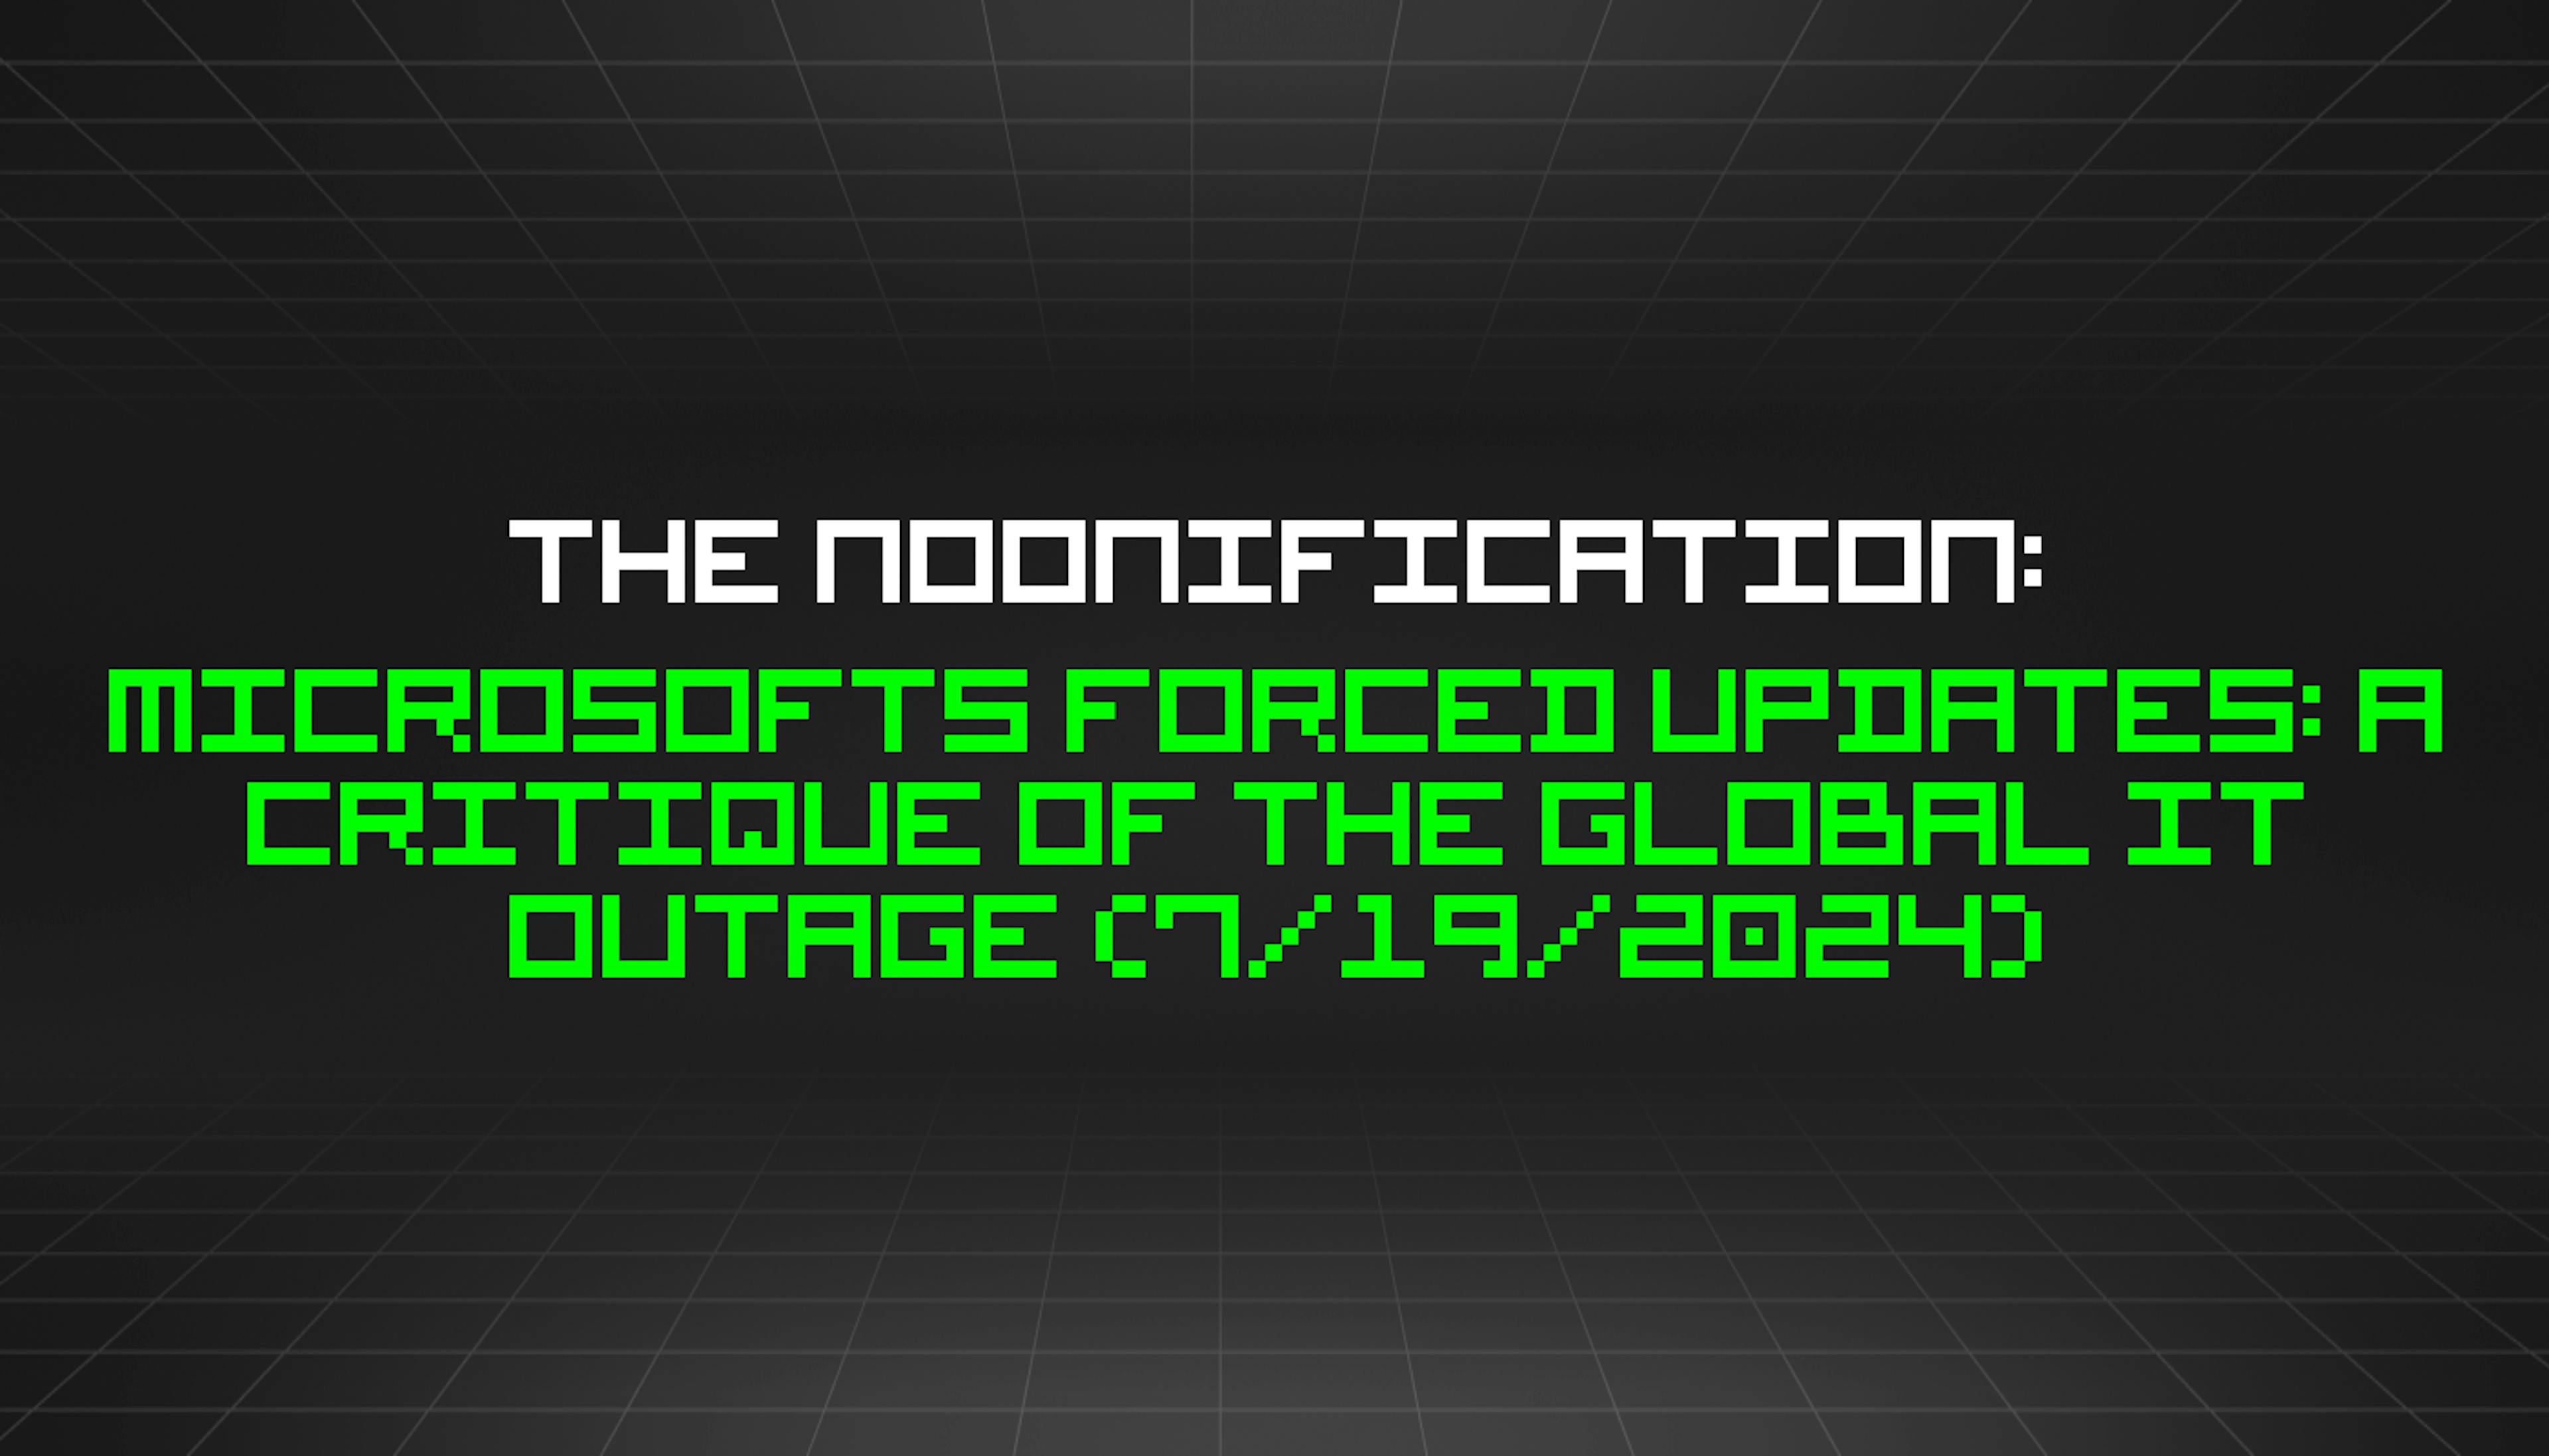 featured image - The Noonification: Microsofts Forced Updates: A Critique of the Global IT Outage (7/19/2024)